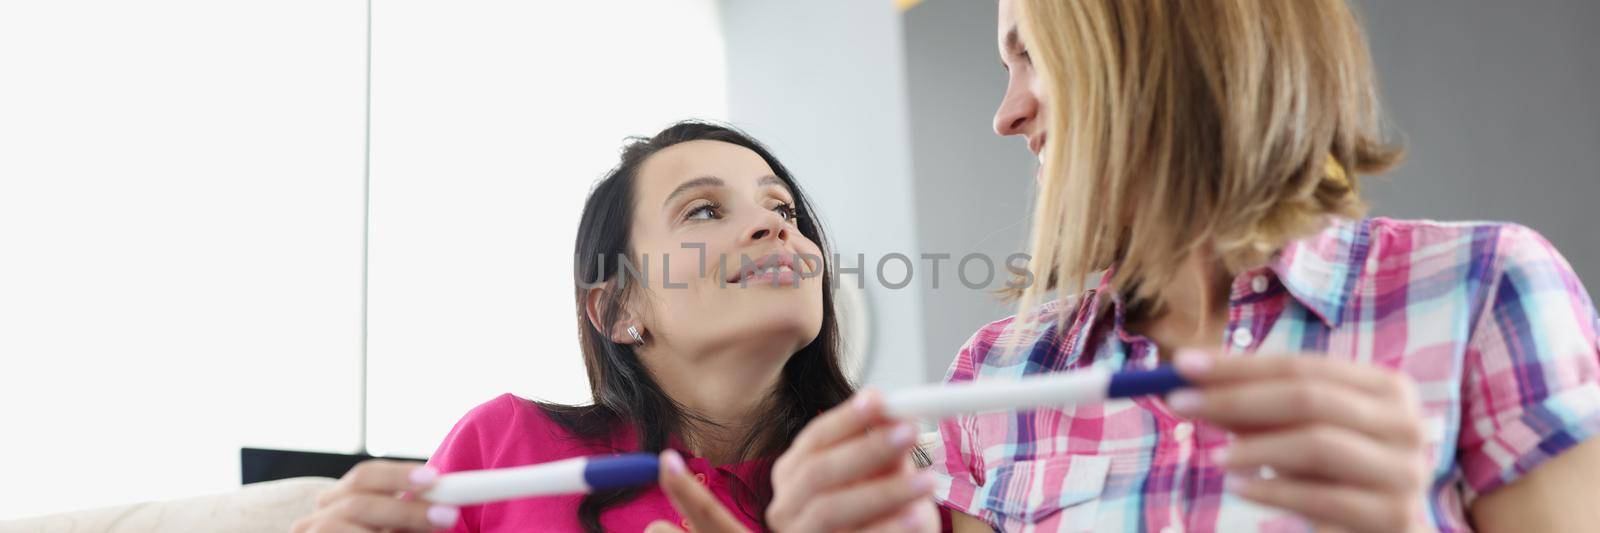 Portrait of best friends hold pregnancy tests, women celebrate big news. Smiling sisters look at each other. Pregnancy, new period, life change concept